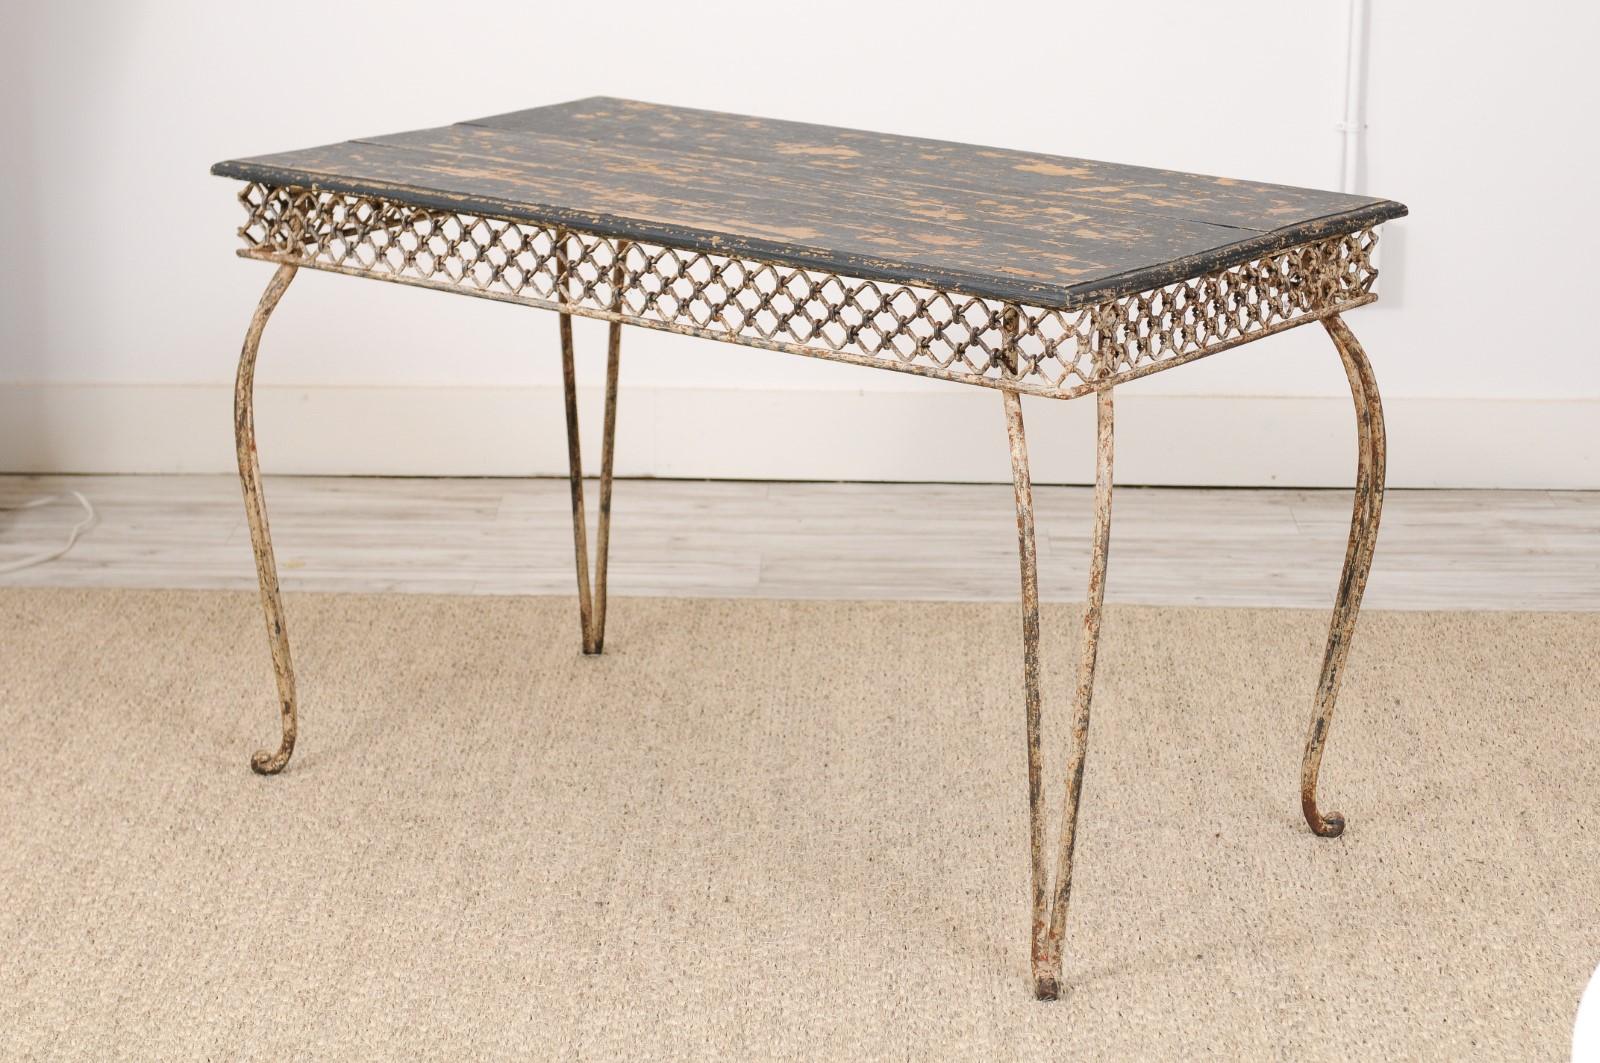 Late 19th Century Iron and Wood Garden Table 3